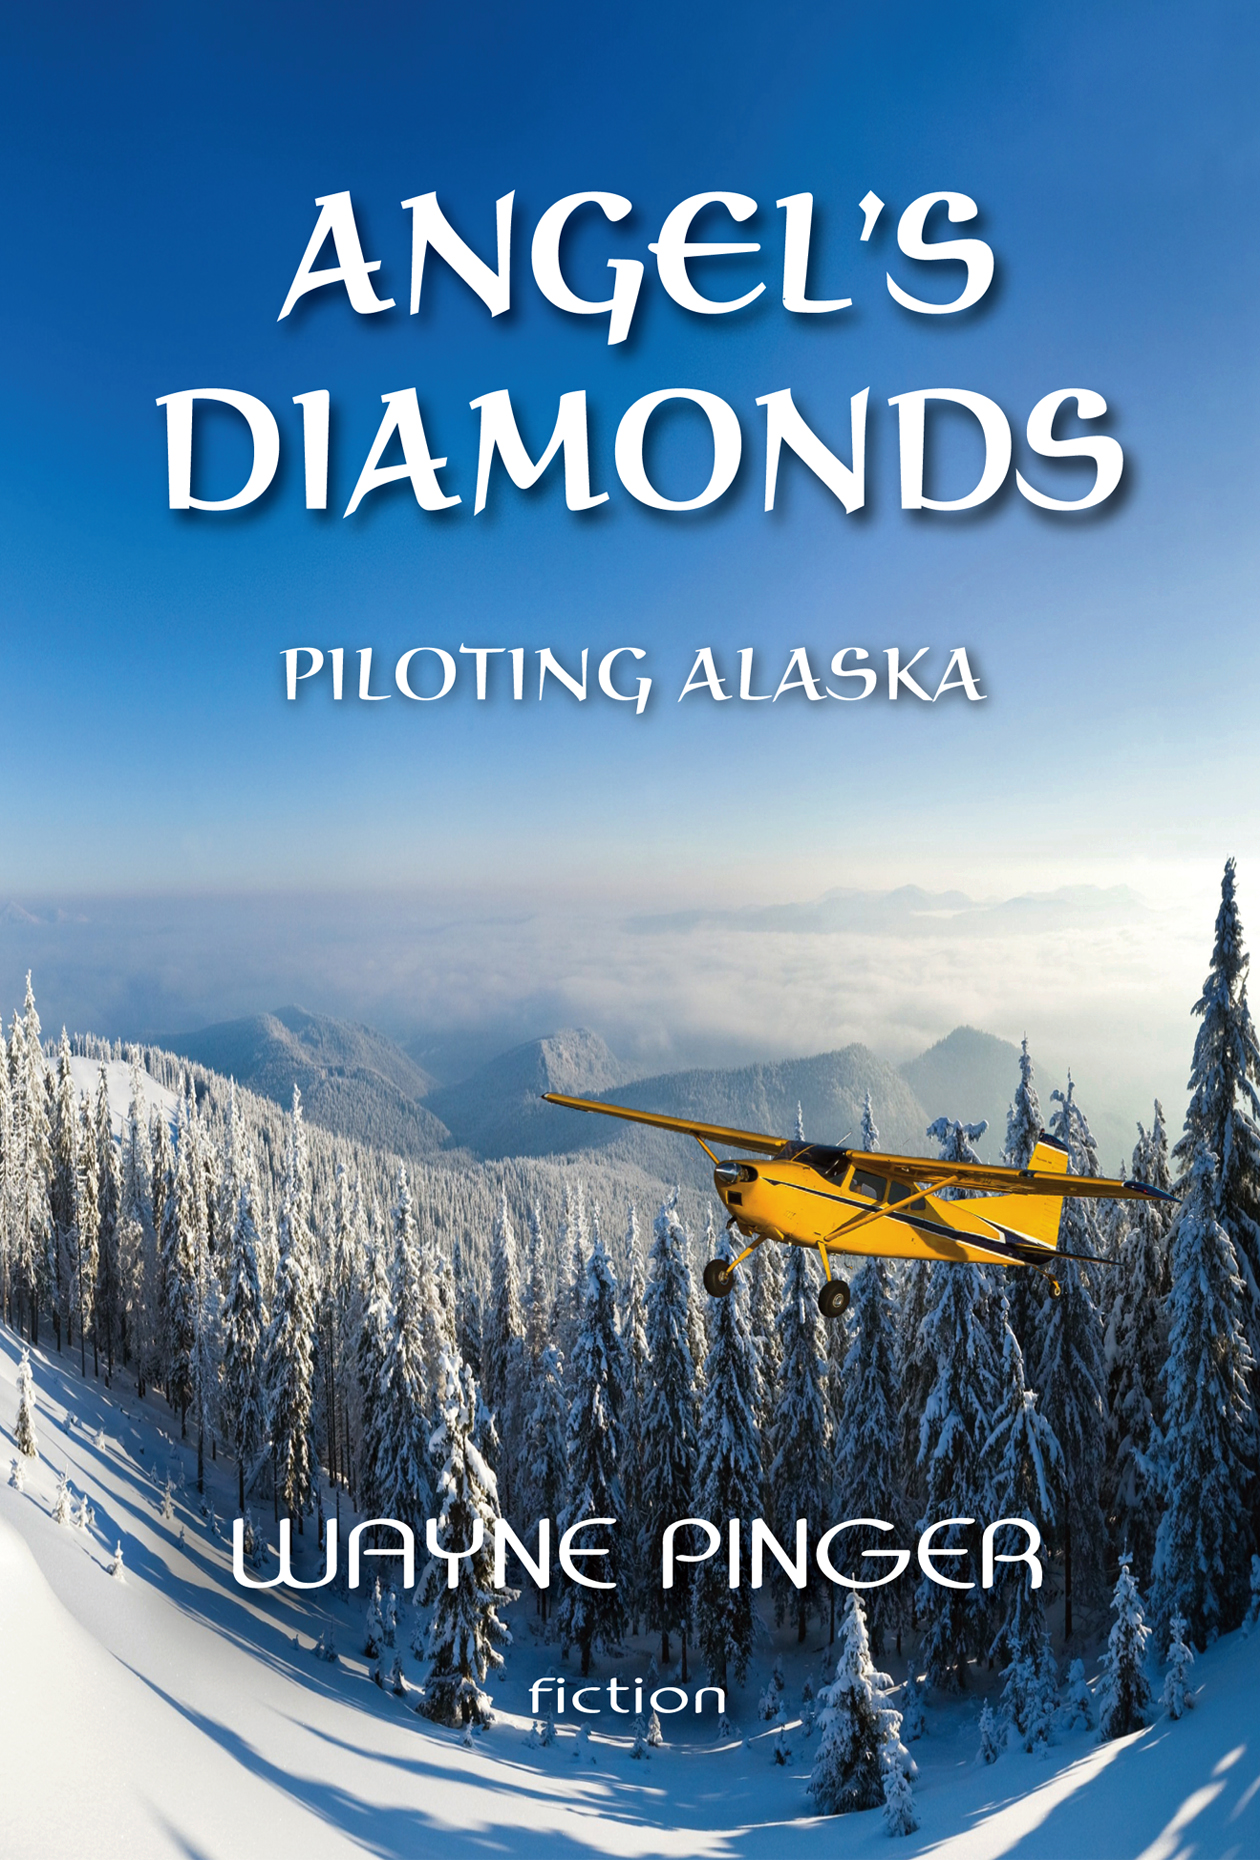 The first book in the Angels in Alaska series, from Firefallmedia